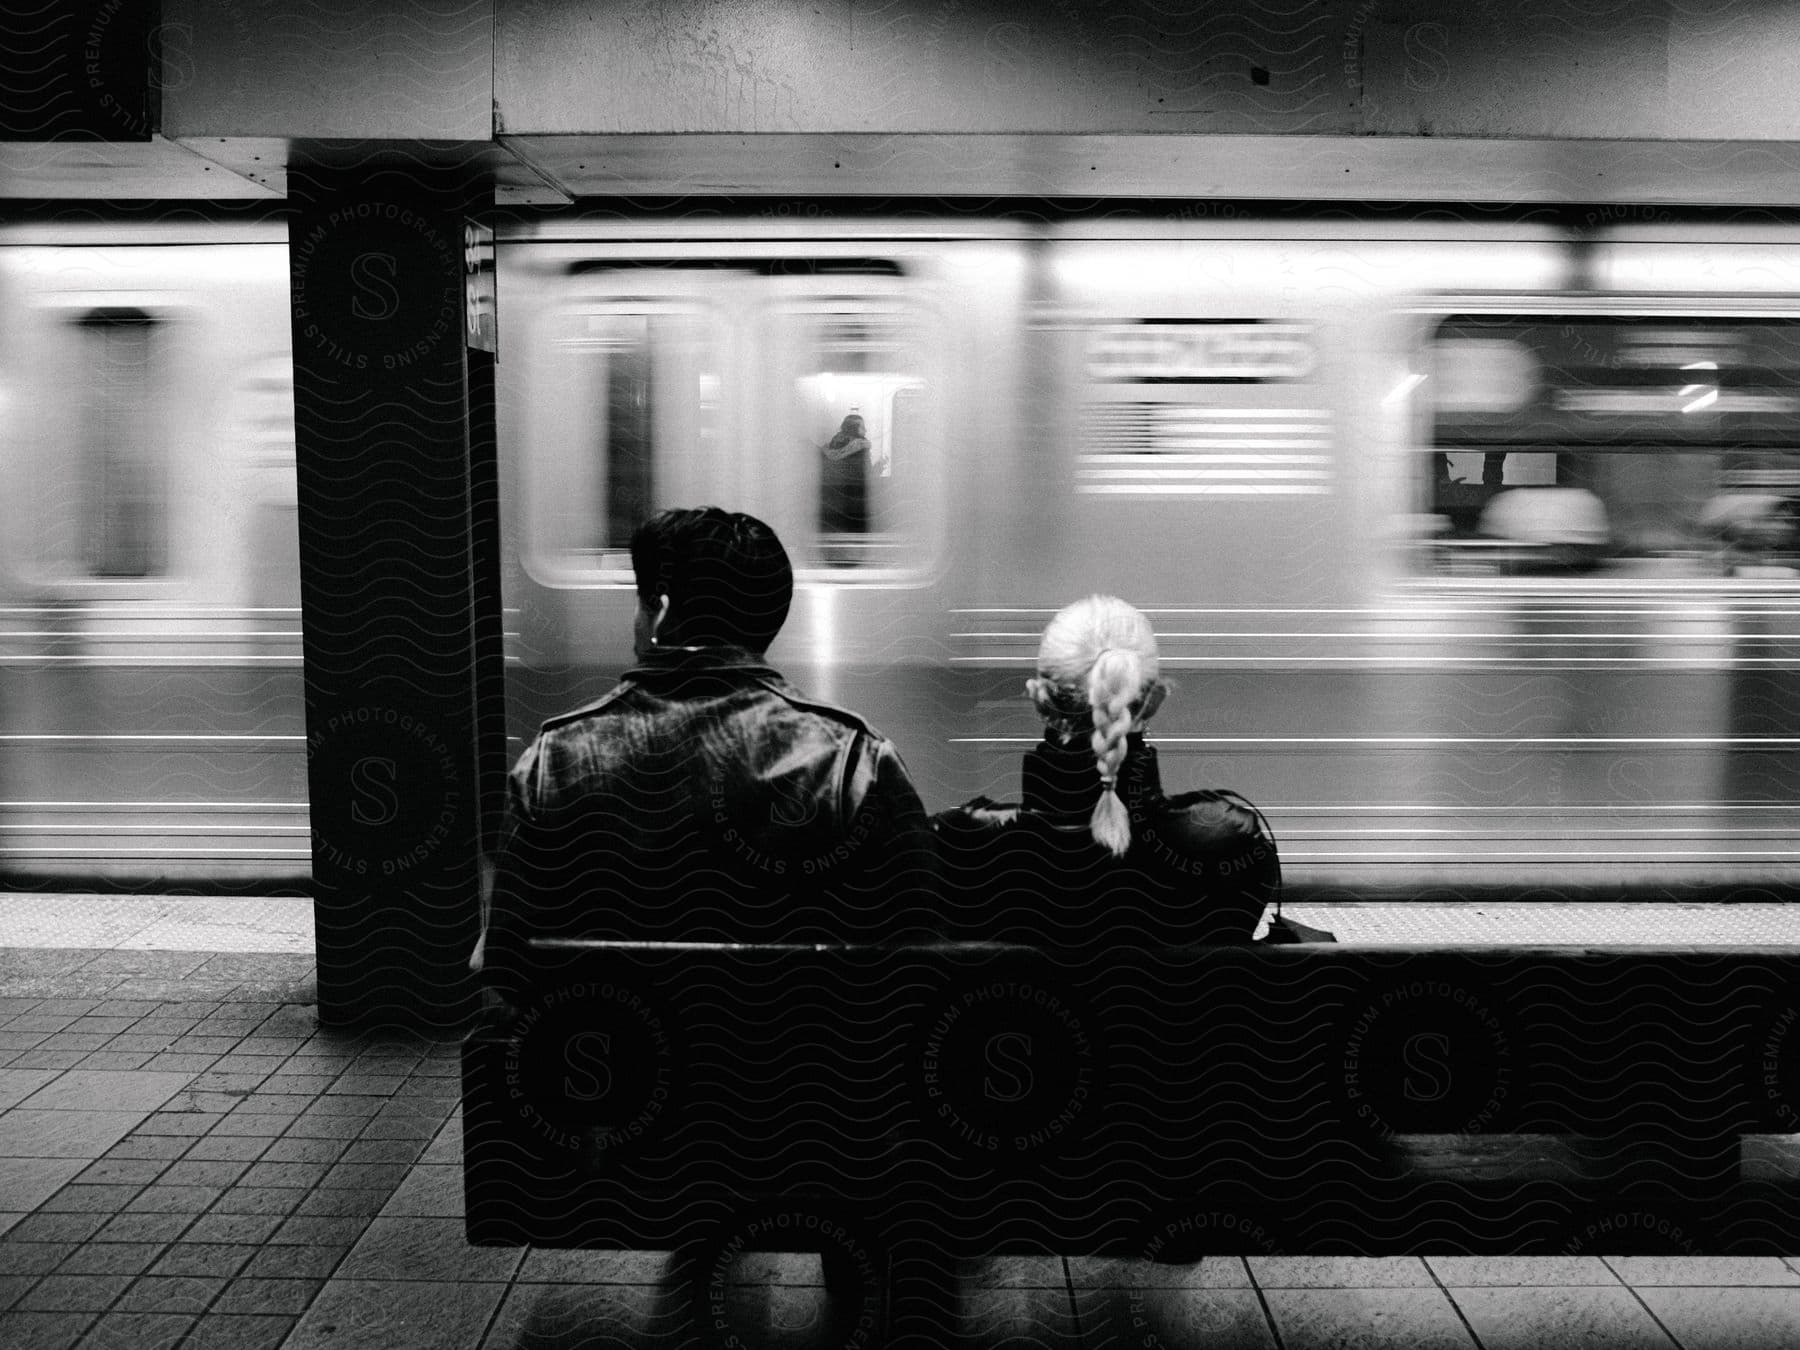 A man and woman sitting on a bench watching a subway train go by.